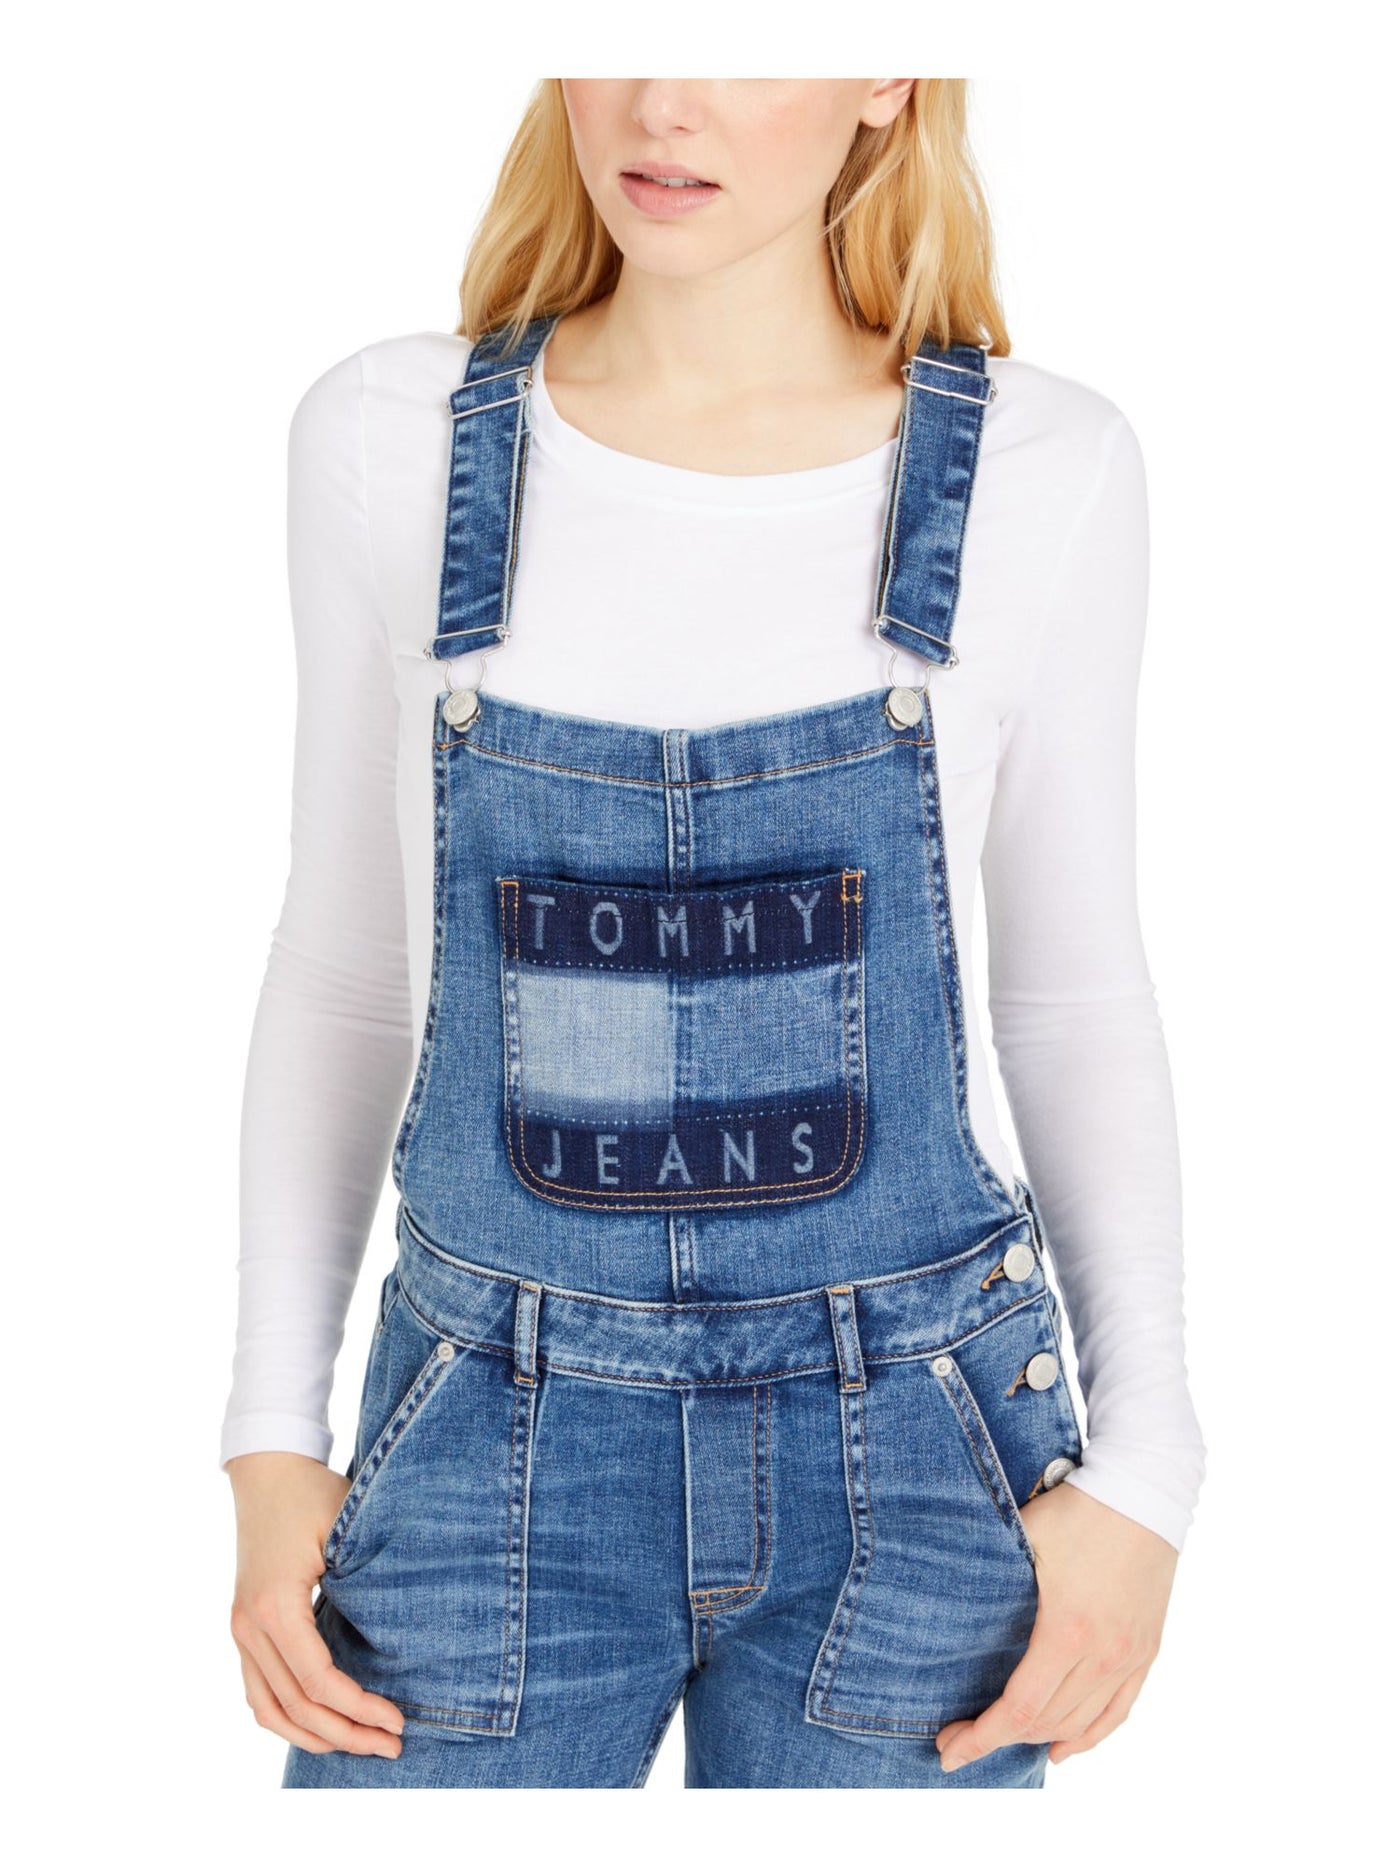 TOMMY JEANS Womens Blue Denim Distressed Pocketed Bib Overalls Adjustable Straps Logo Graphic Sleeveless Square Neck Cropped Jumpsuit 0\W25